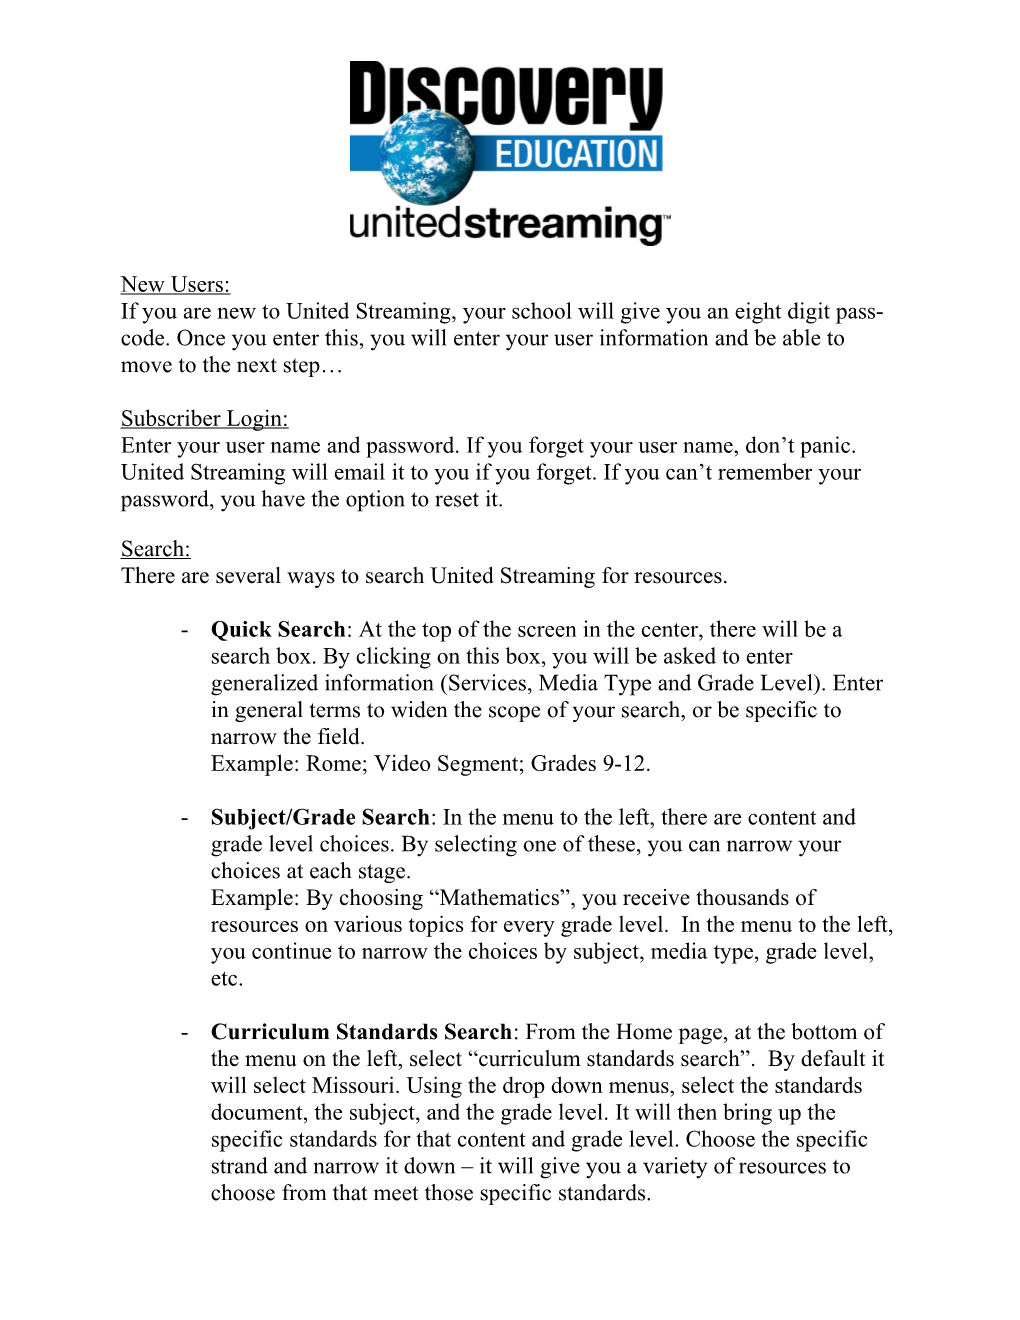 There Are Several Ways to Search United Streaming for Resources